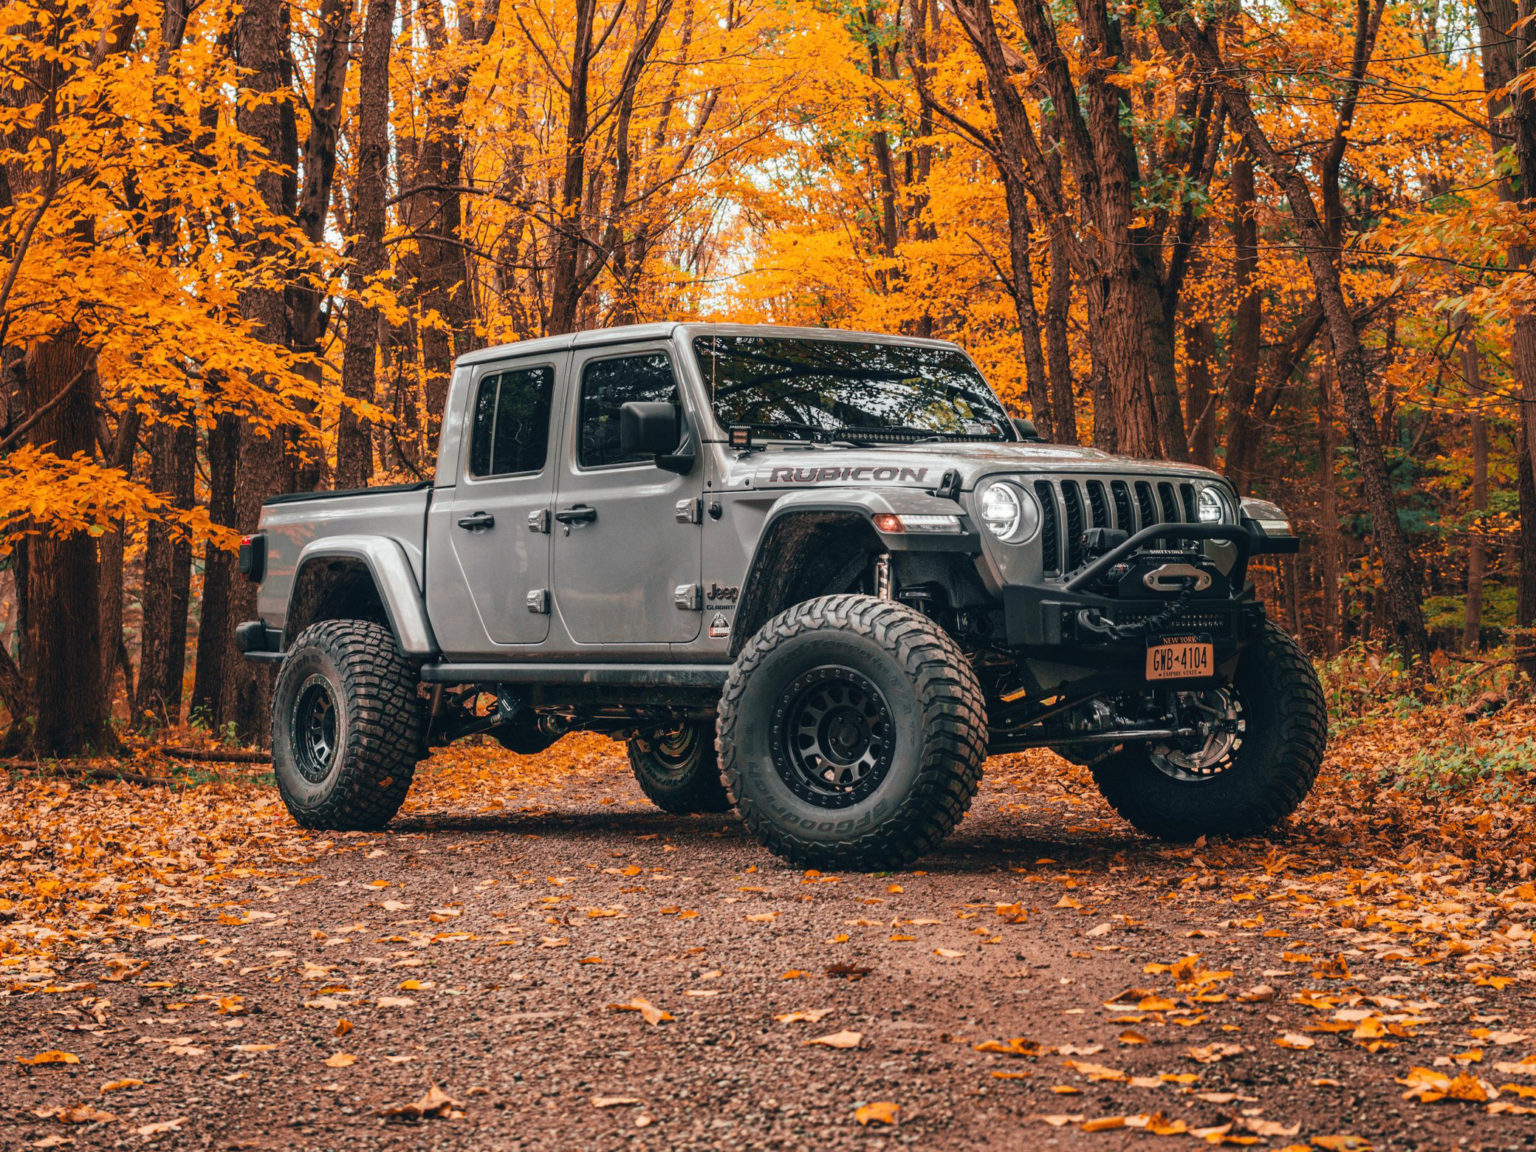 A seller from Elma, New York has taken his Jeep Gladiator to the next level.